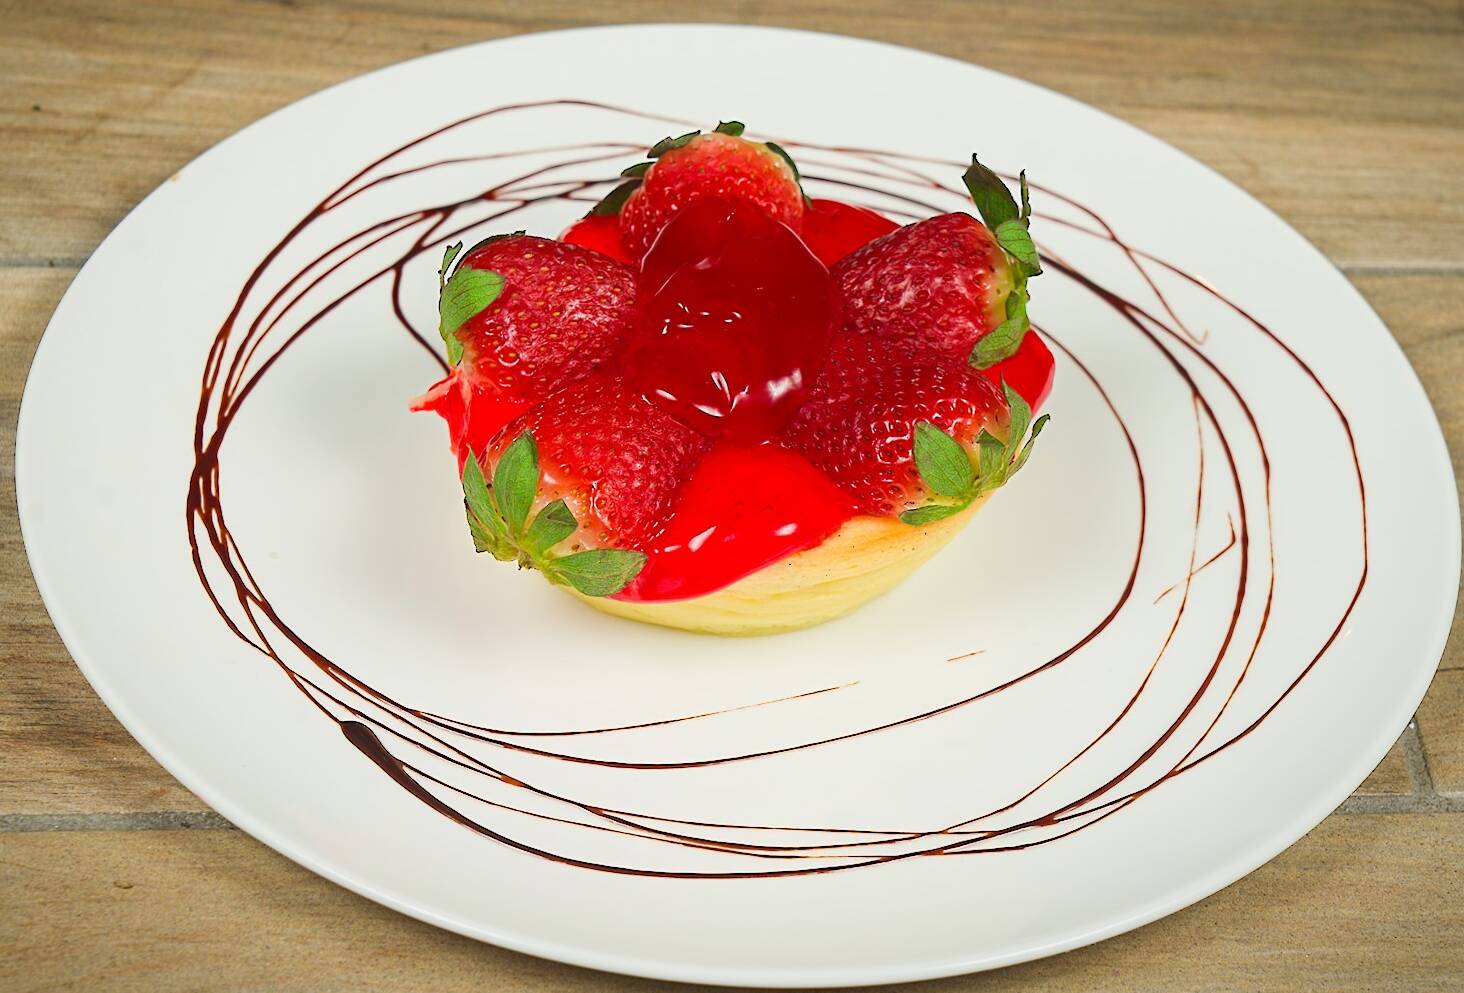 Strawberry cheesecake on a plate.